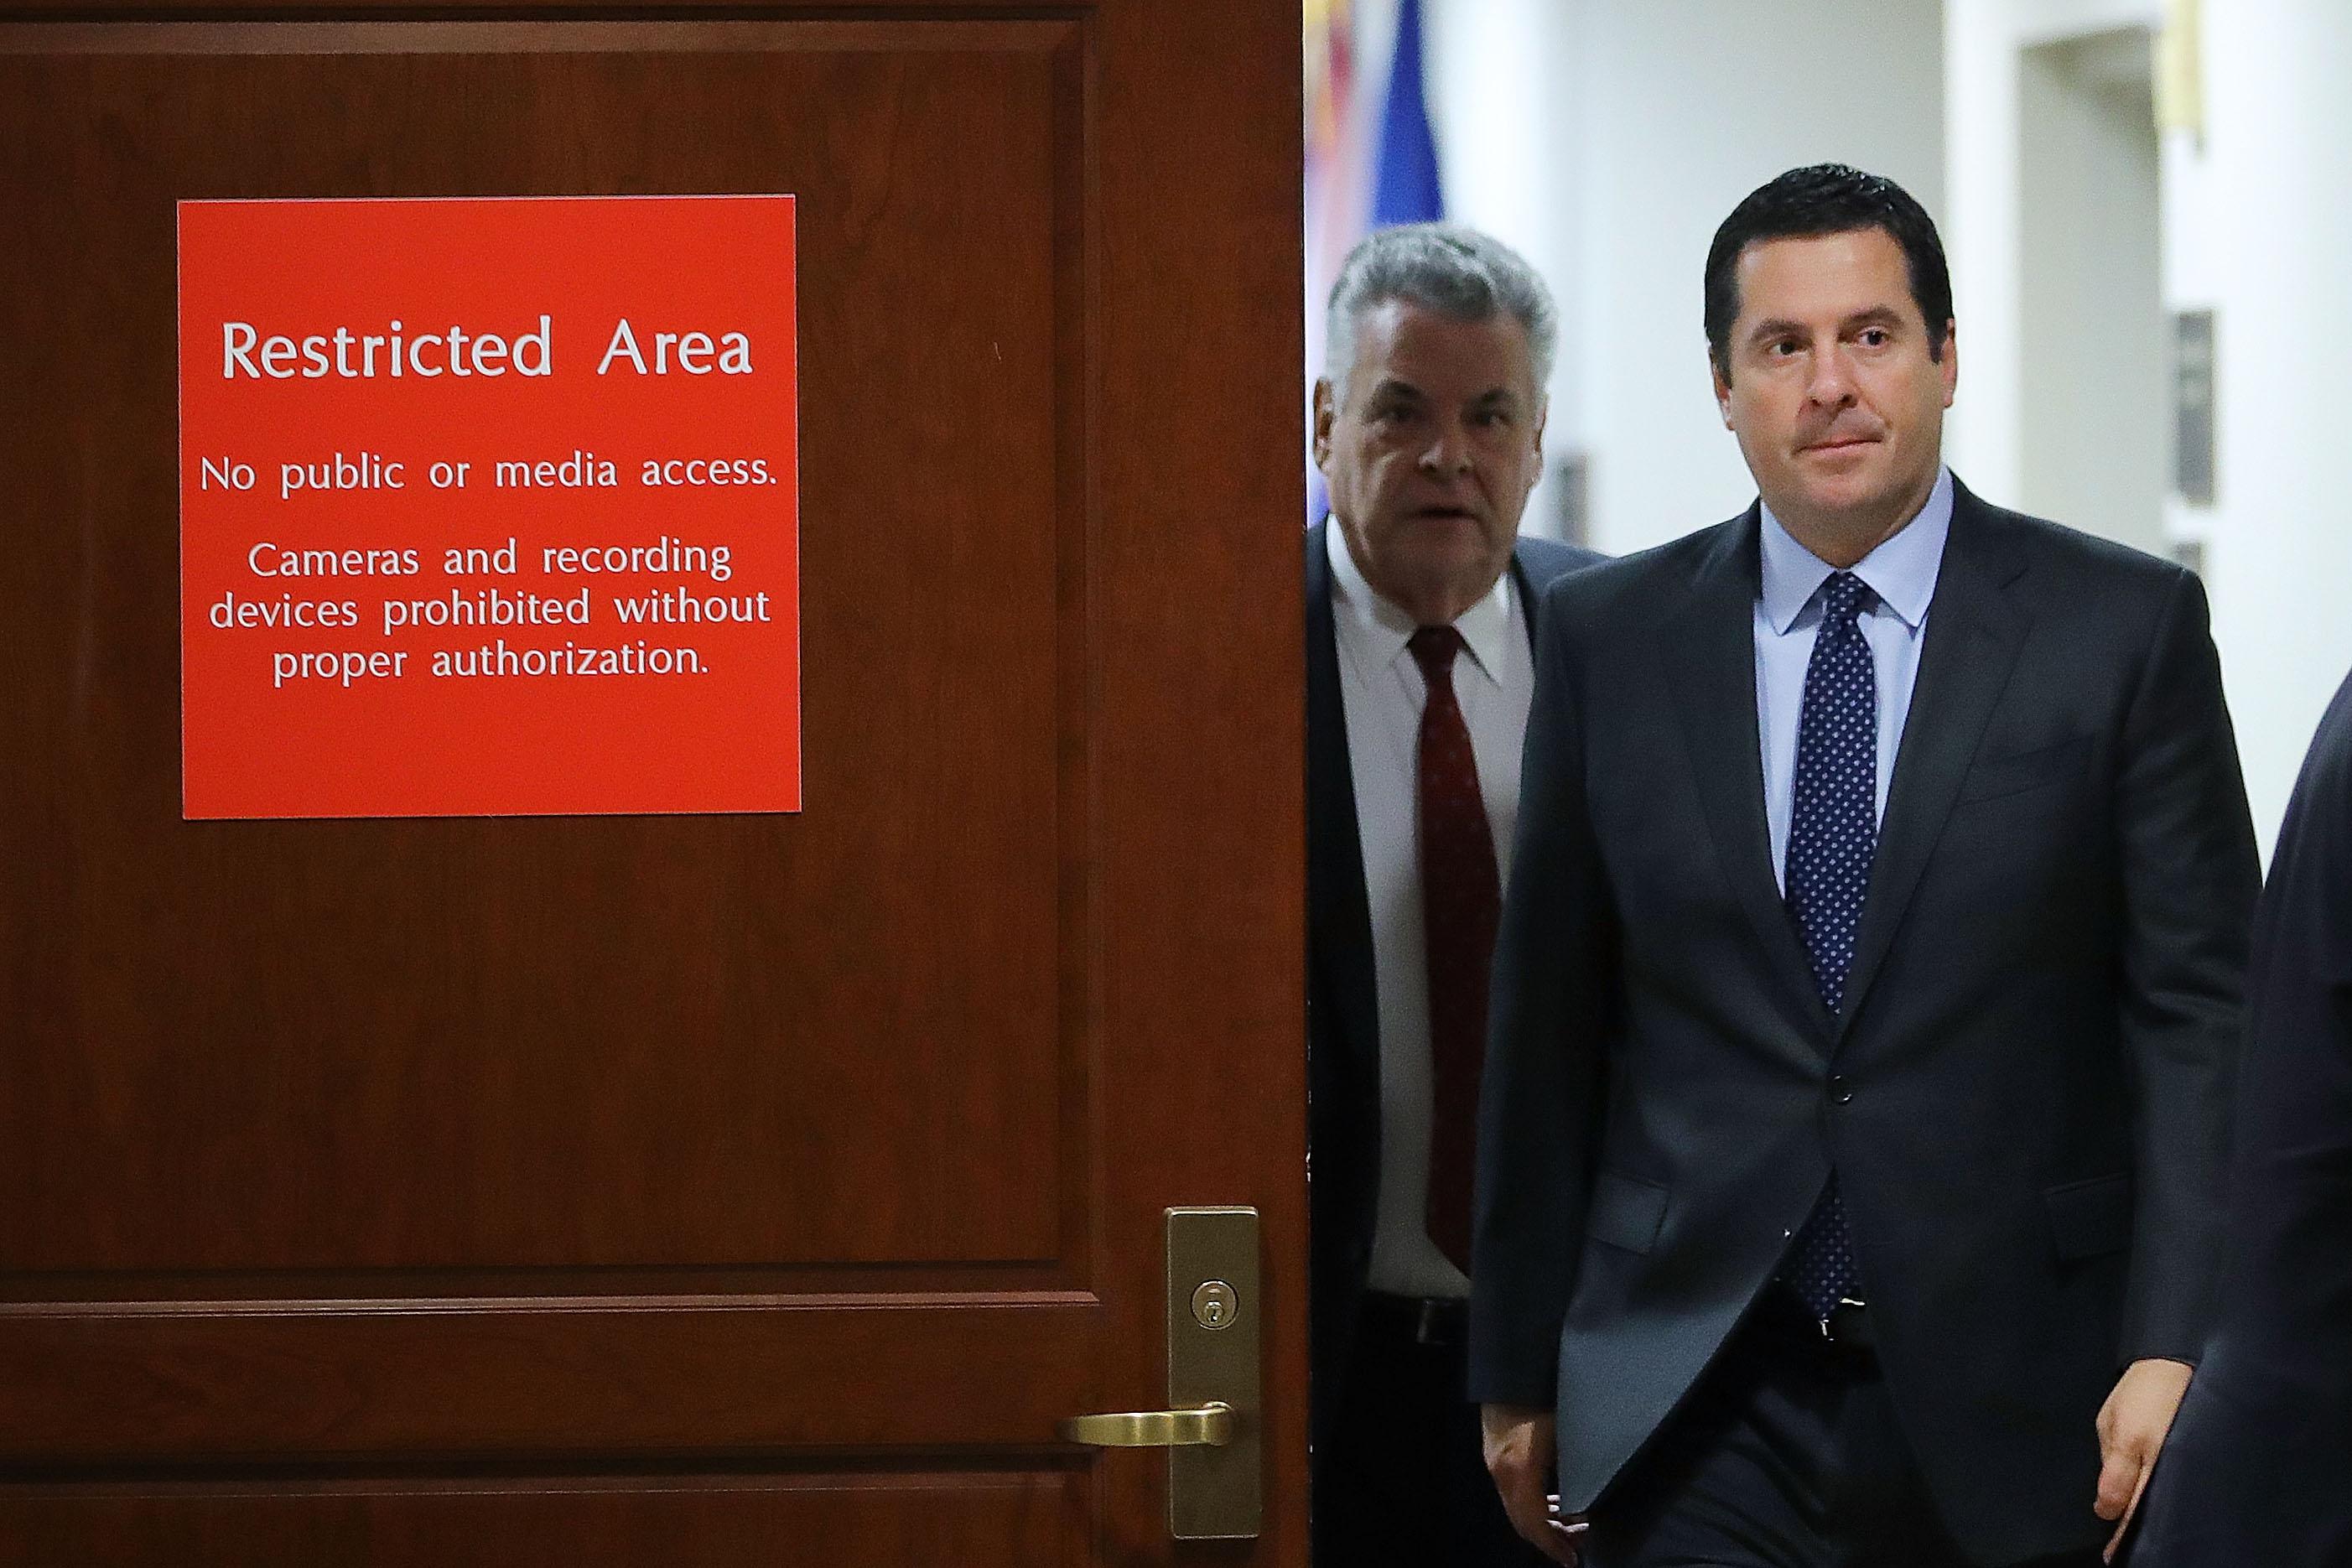 House Intelligence Committee Chairman Devin Nunes and Rep. Peter King (R-NY) leave the committee's secure meeting rooms in the basement of the U.S. Capitol House Visitors Center.